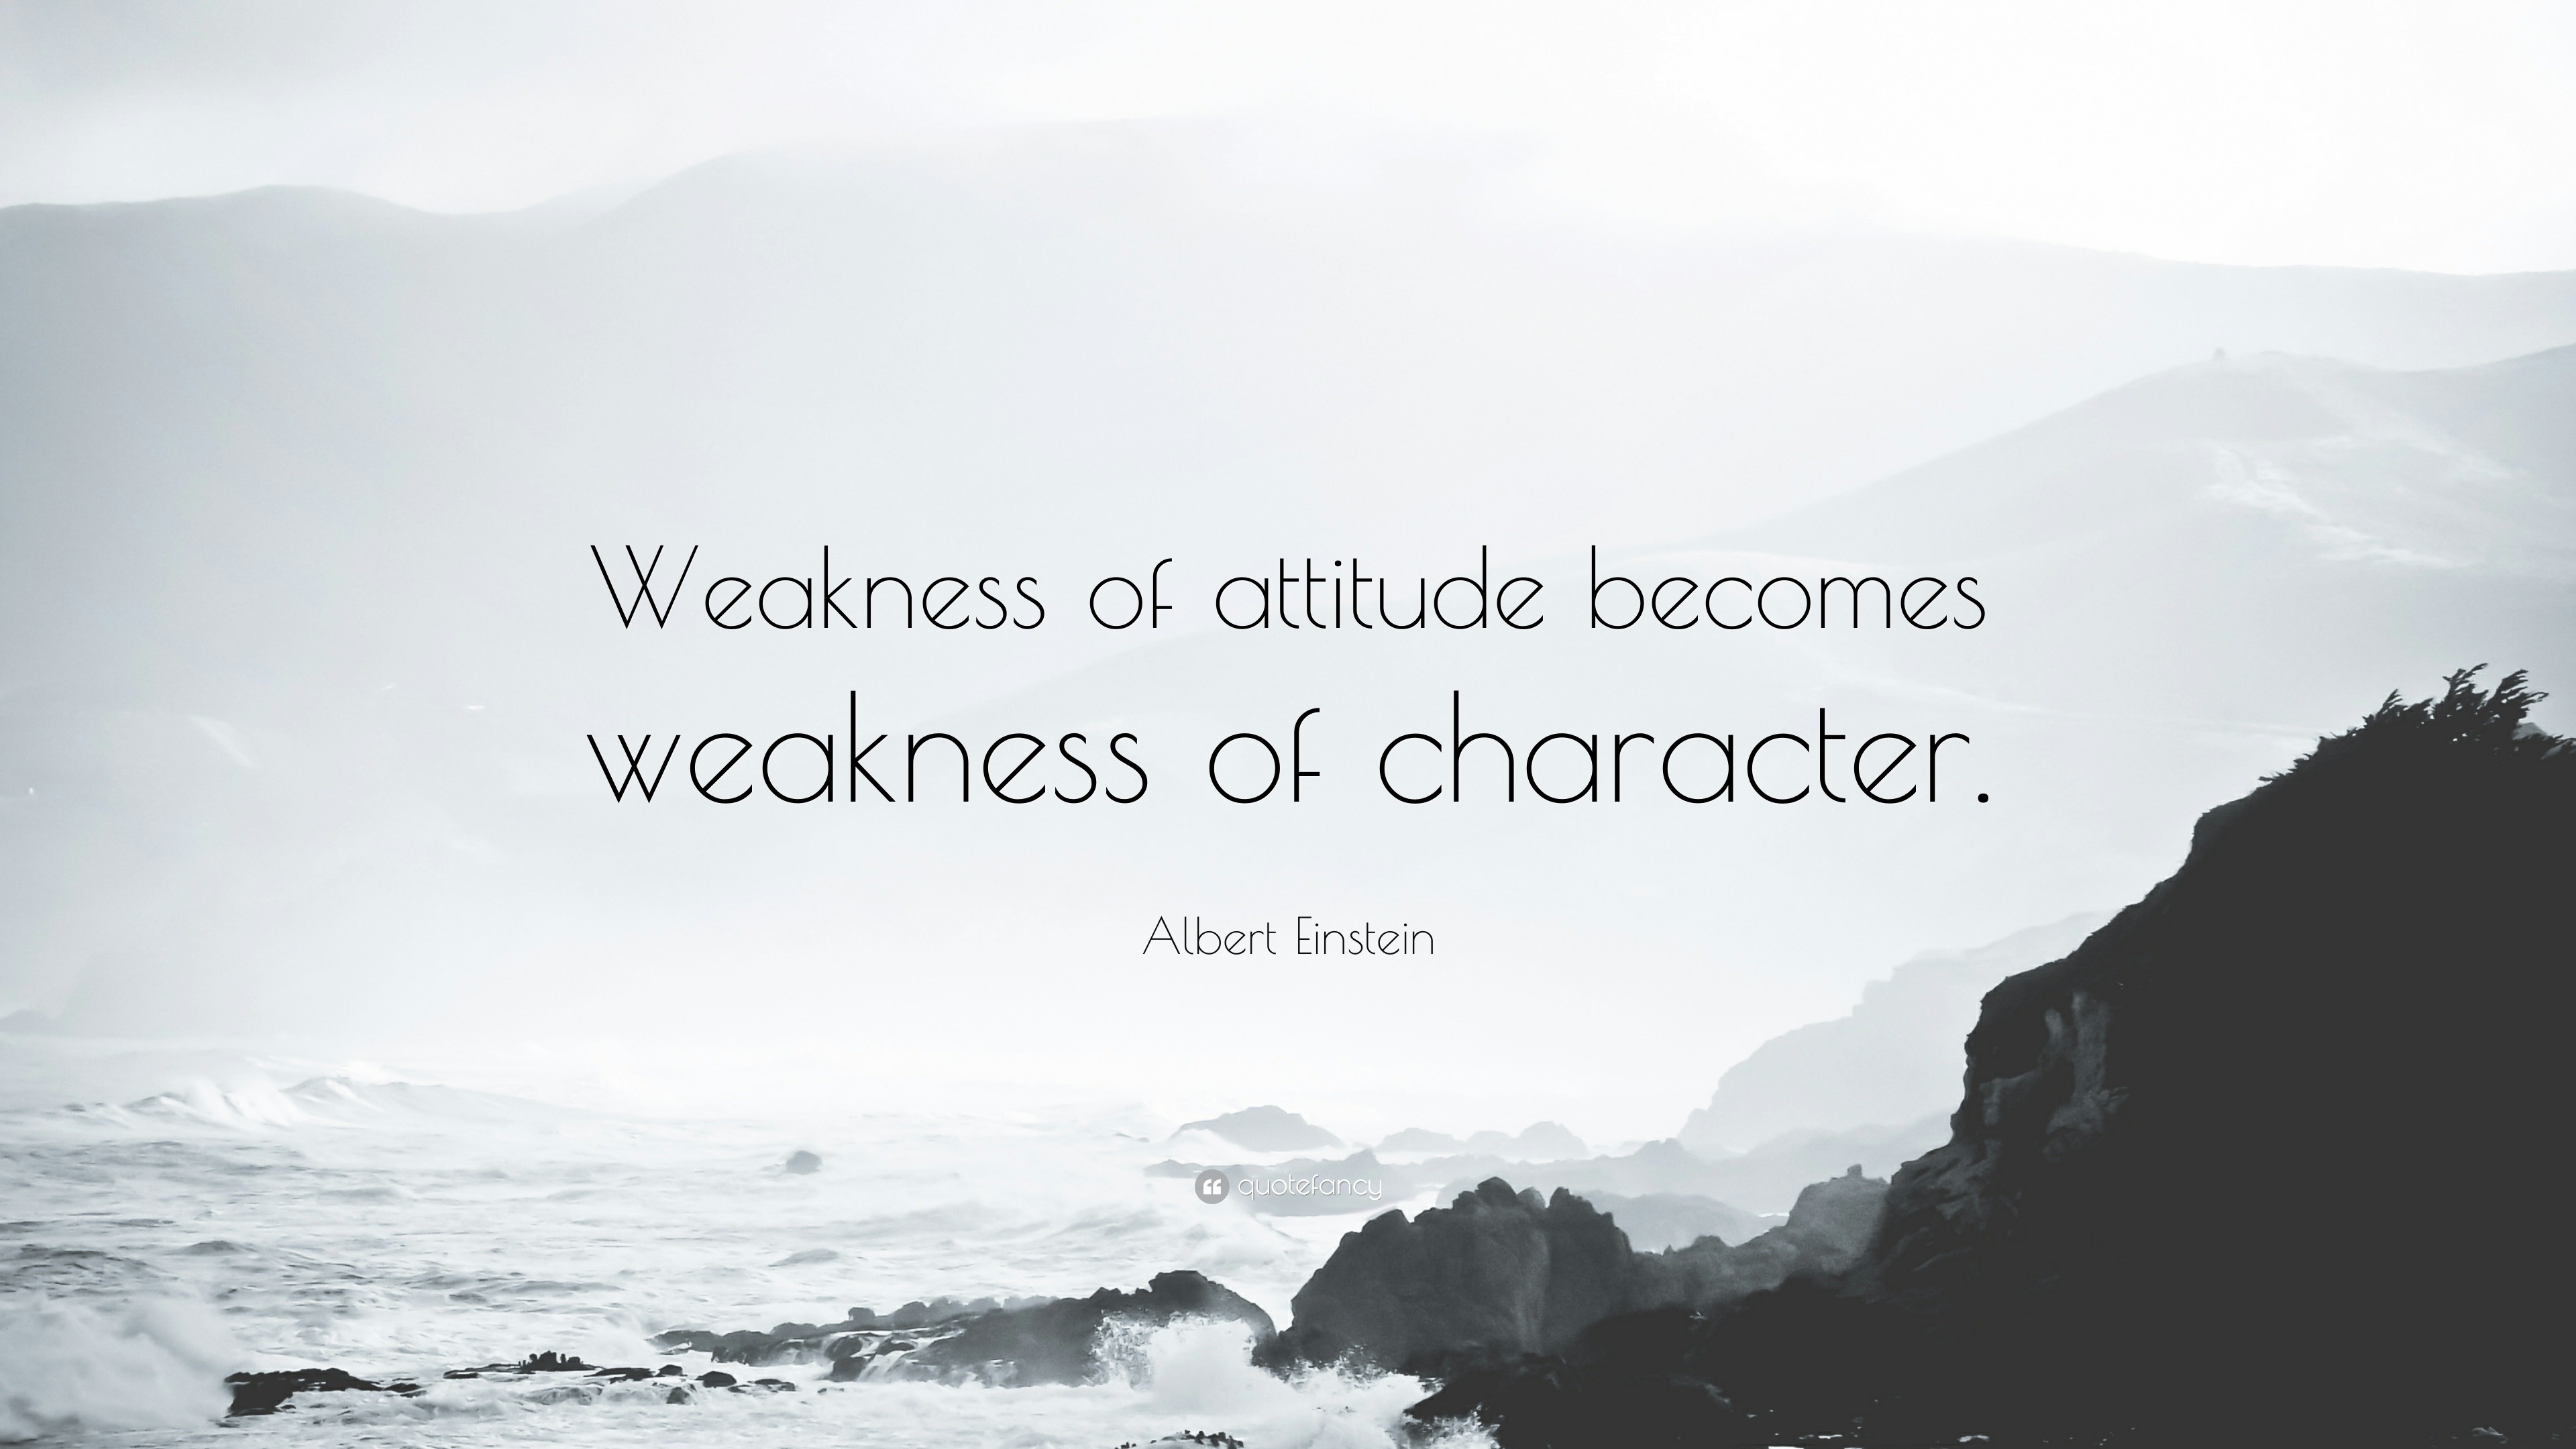 weakness of attitude becomes weakness of character